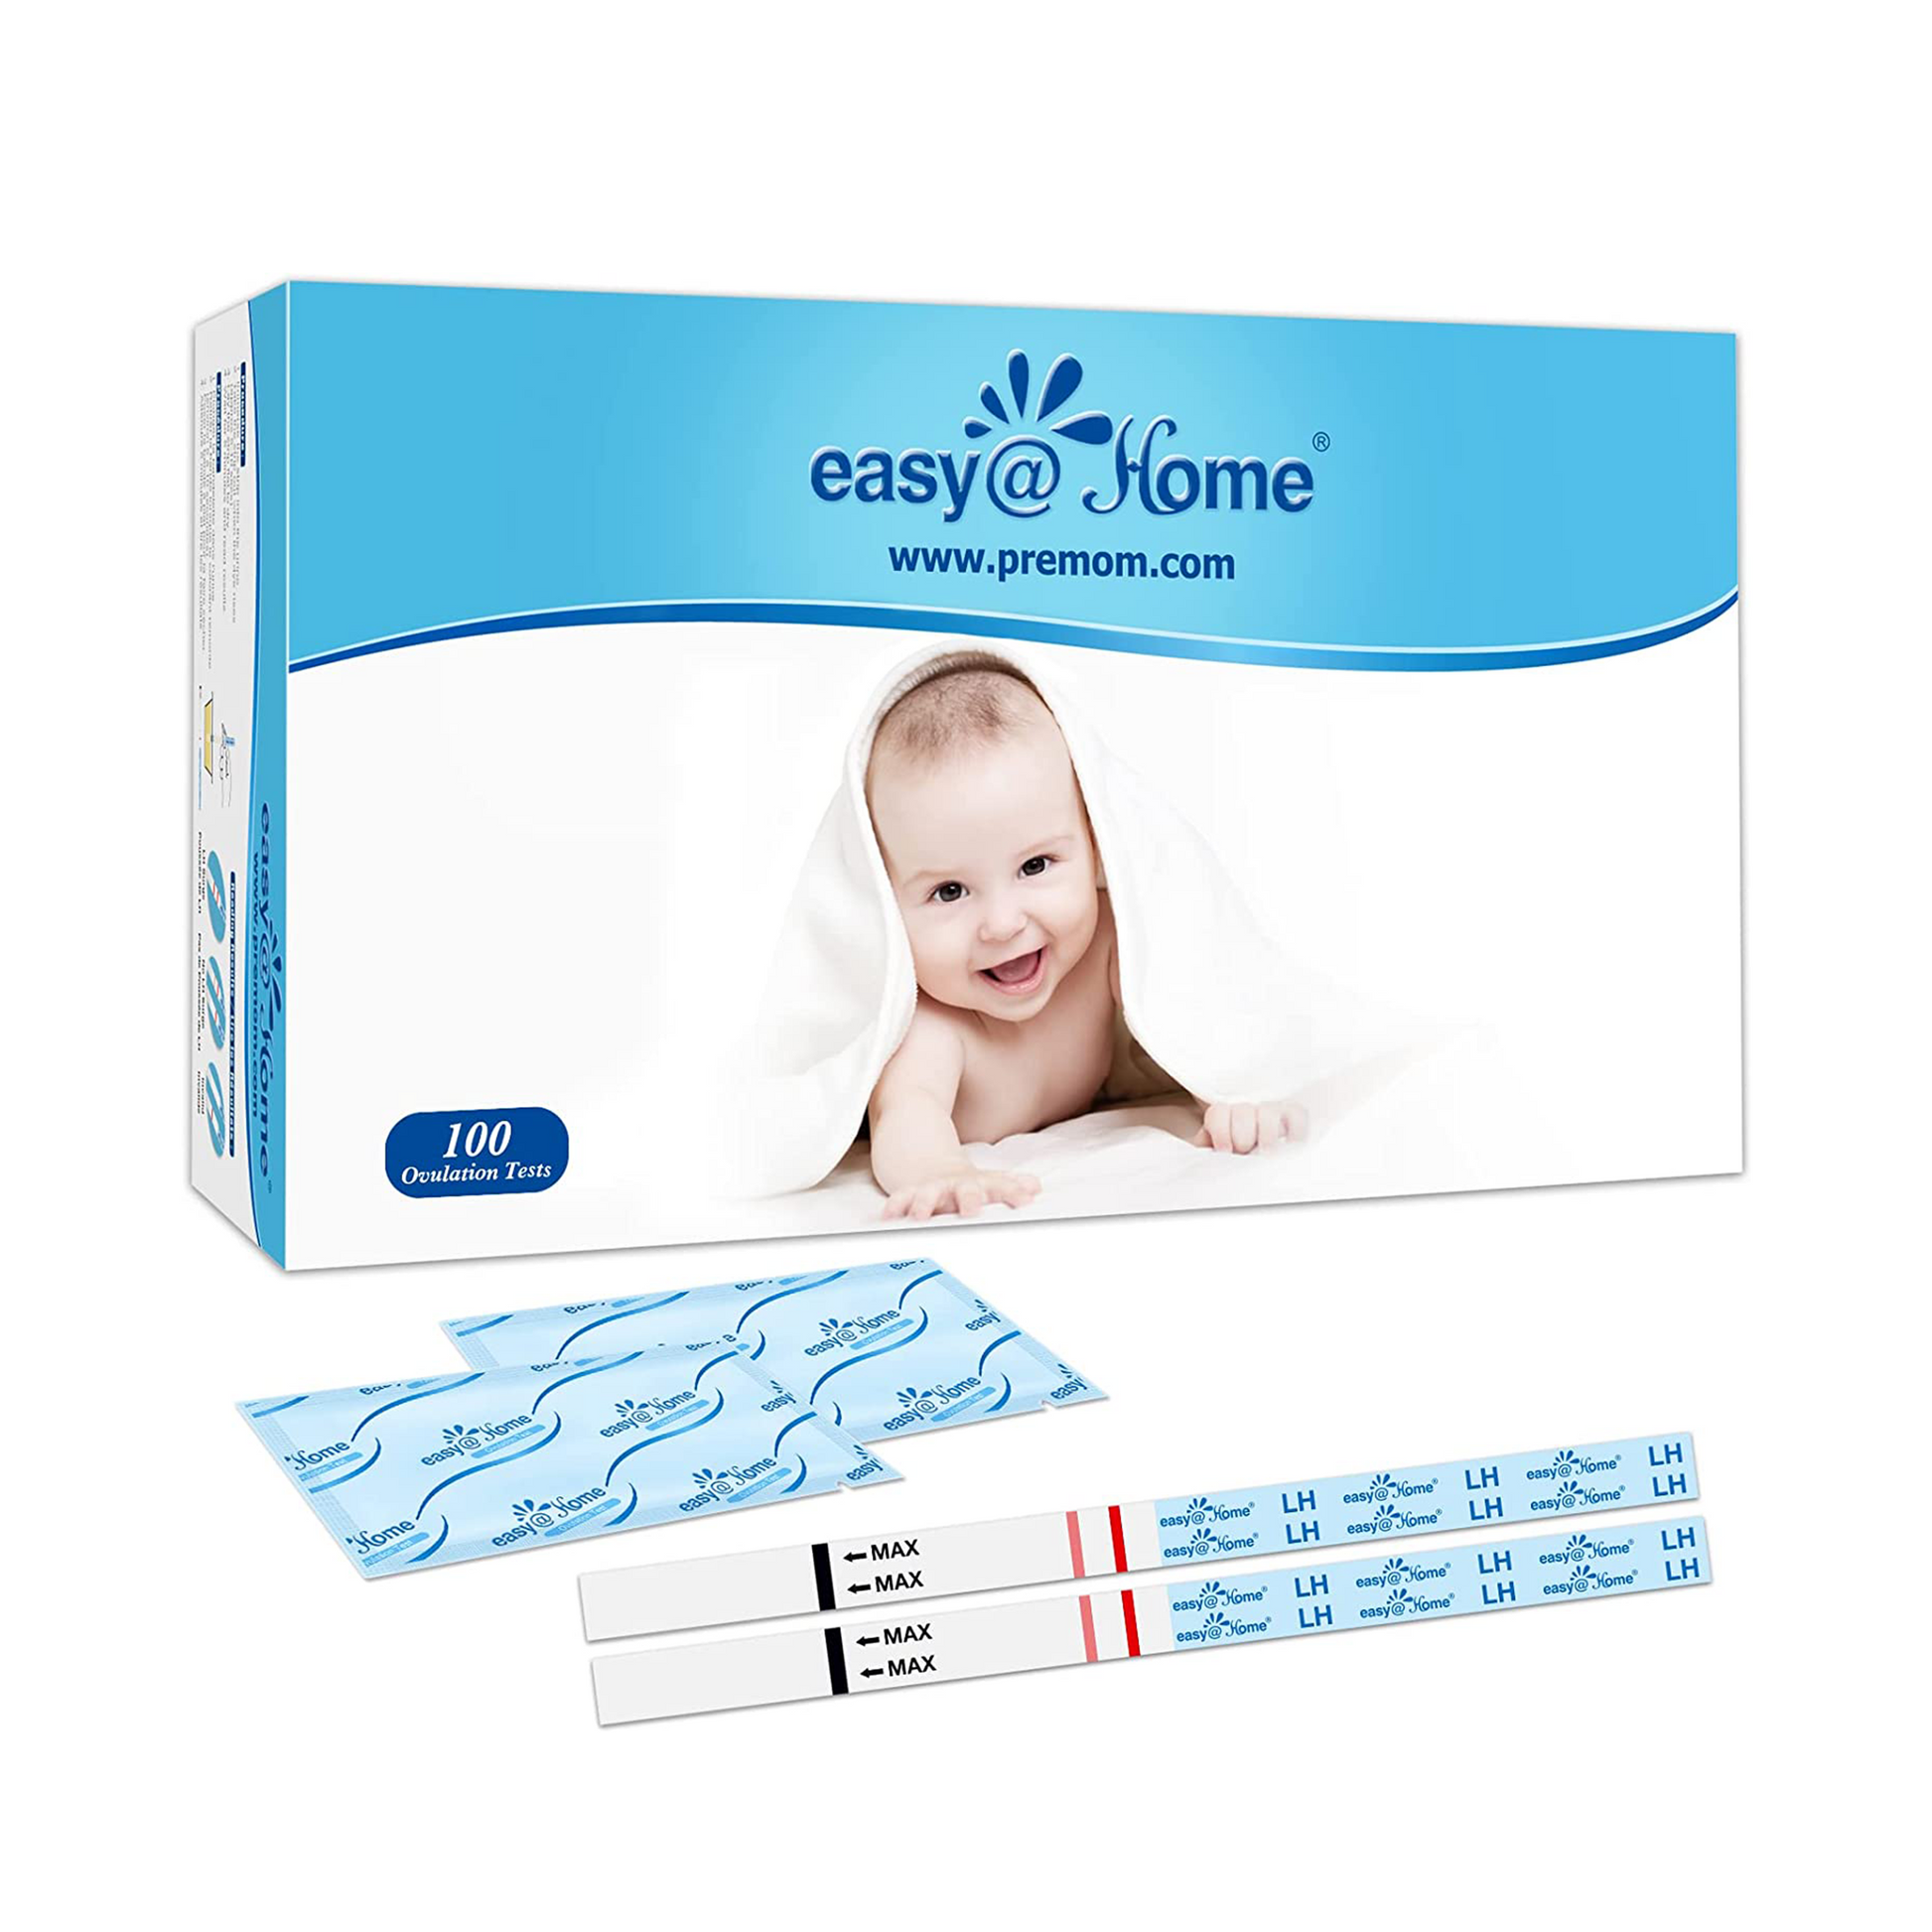 easy@home opk tests, help??